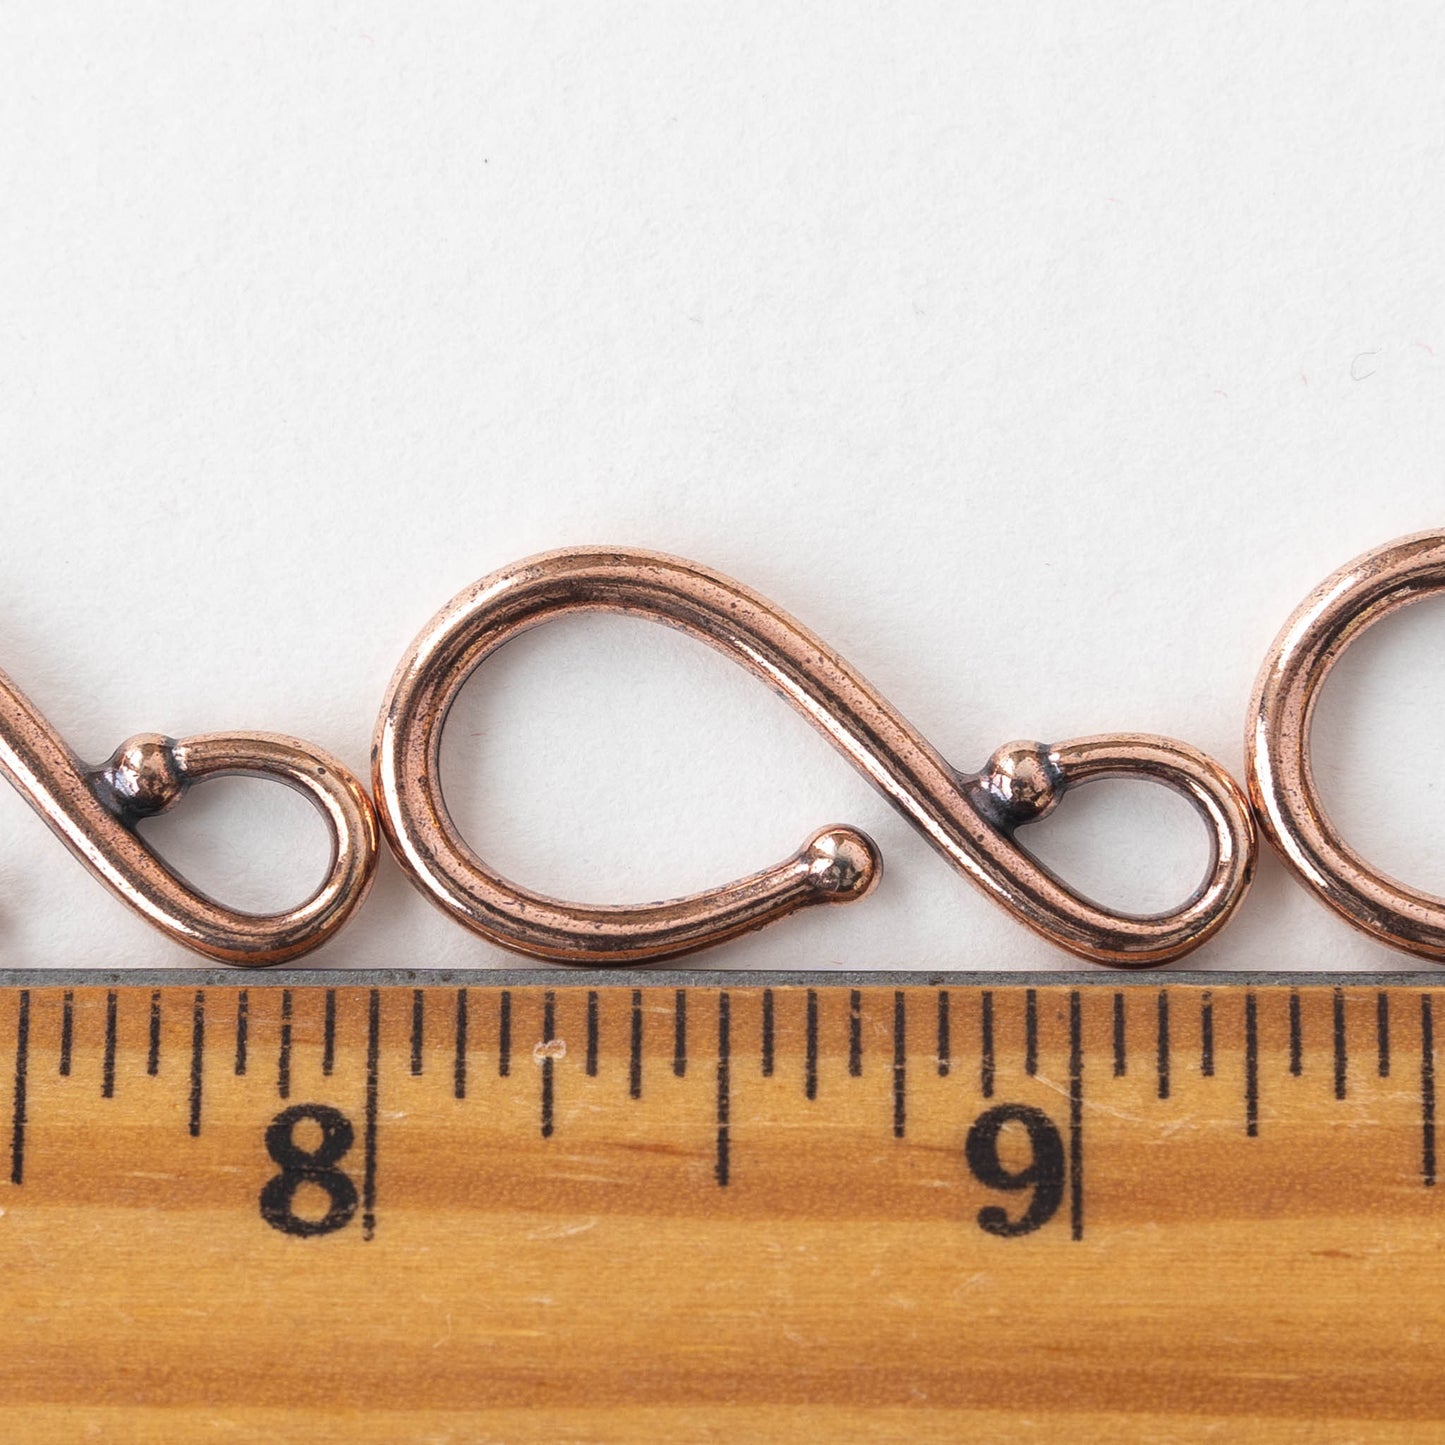 33mm Large Necklace Hook Clasp - Copper - 1 Clasp